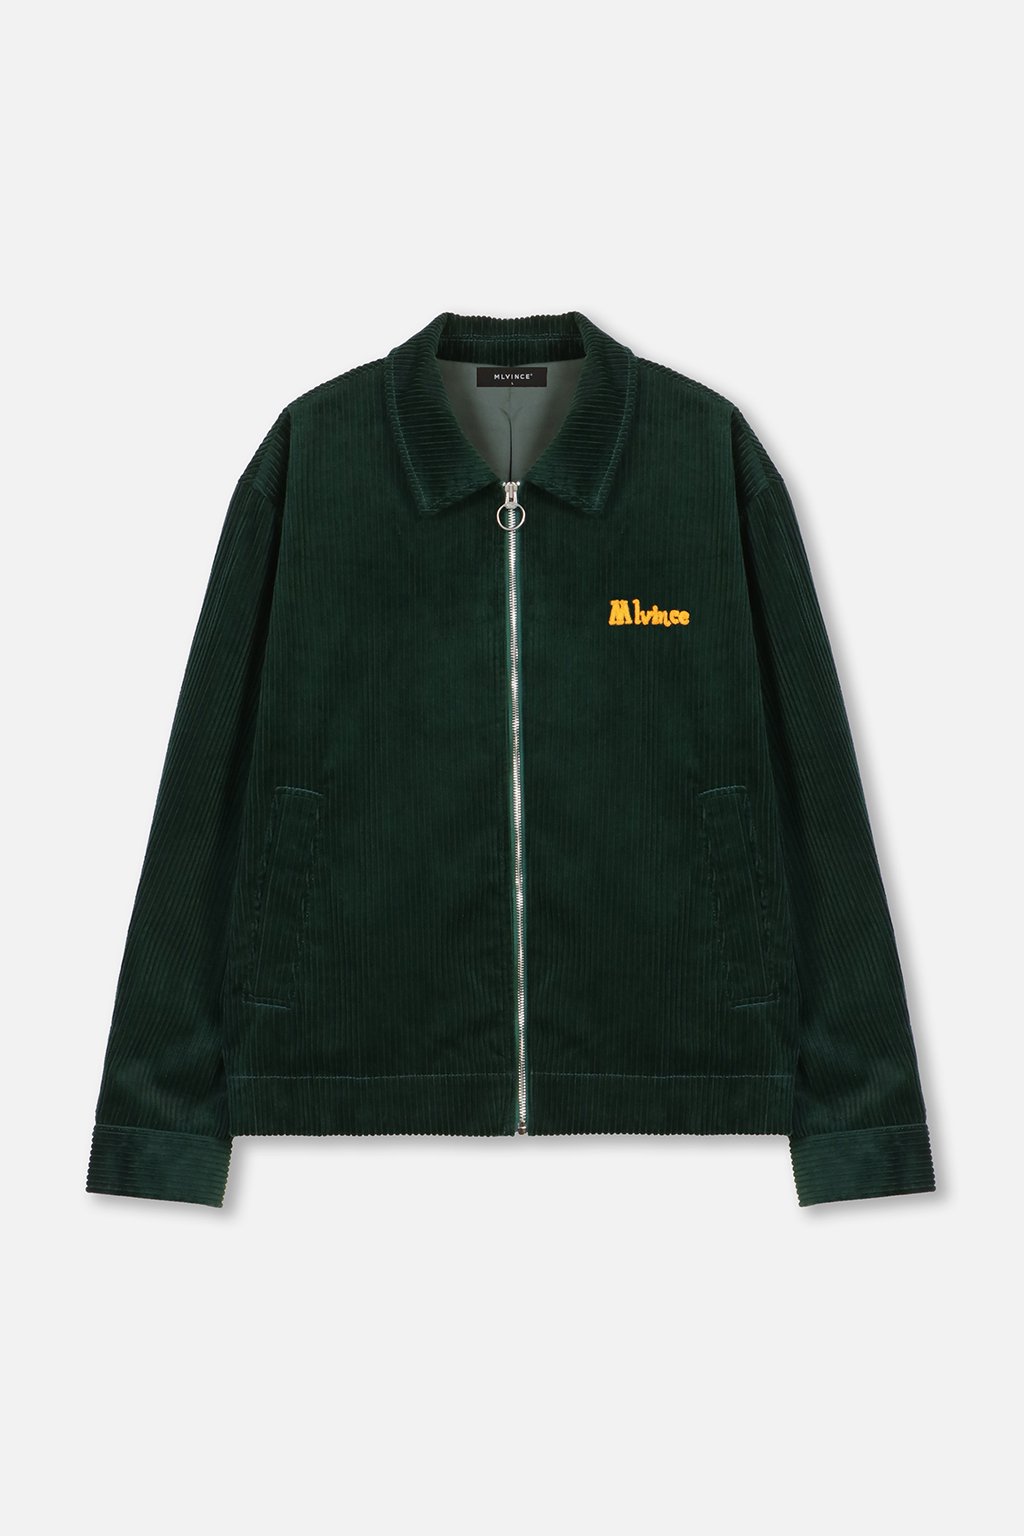 60%OFF MLVINCE (メルヴィンス)｜CORDUROY FLOWER ZIP JACKET GREEN